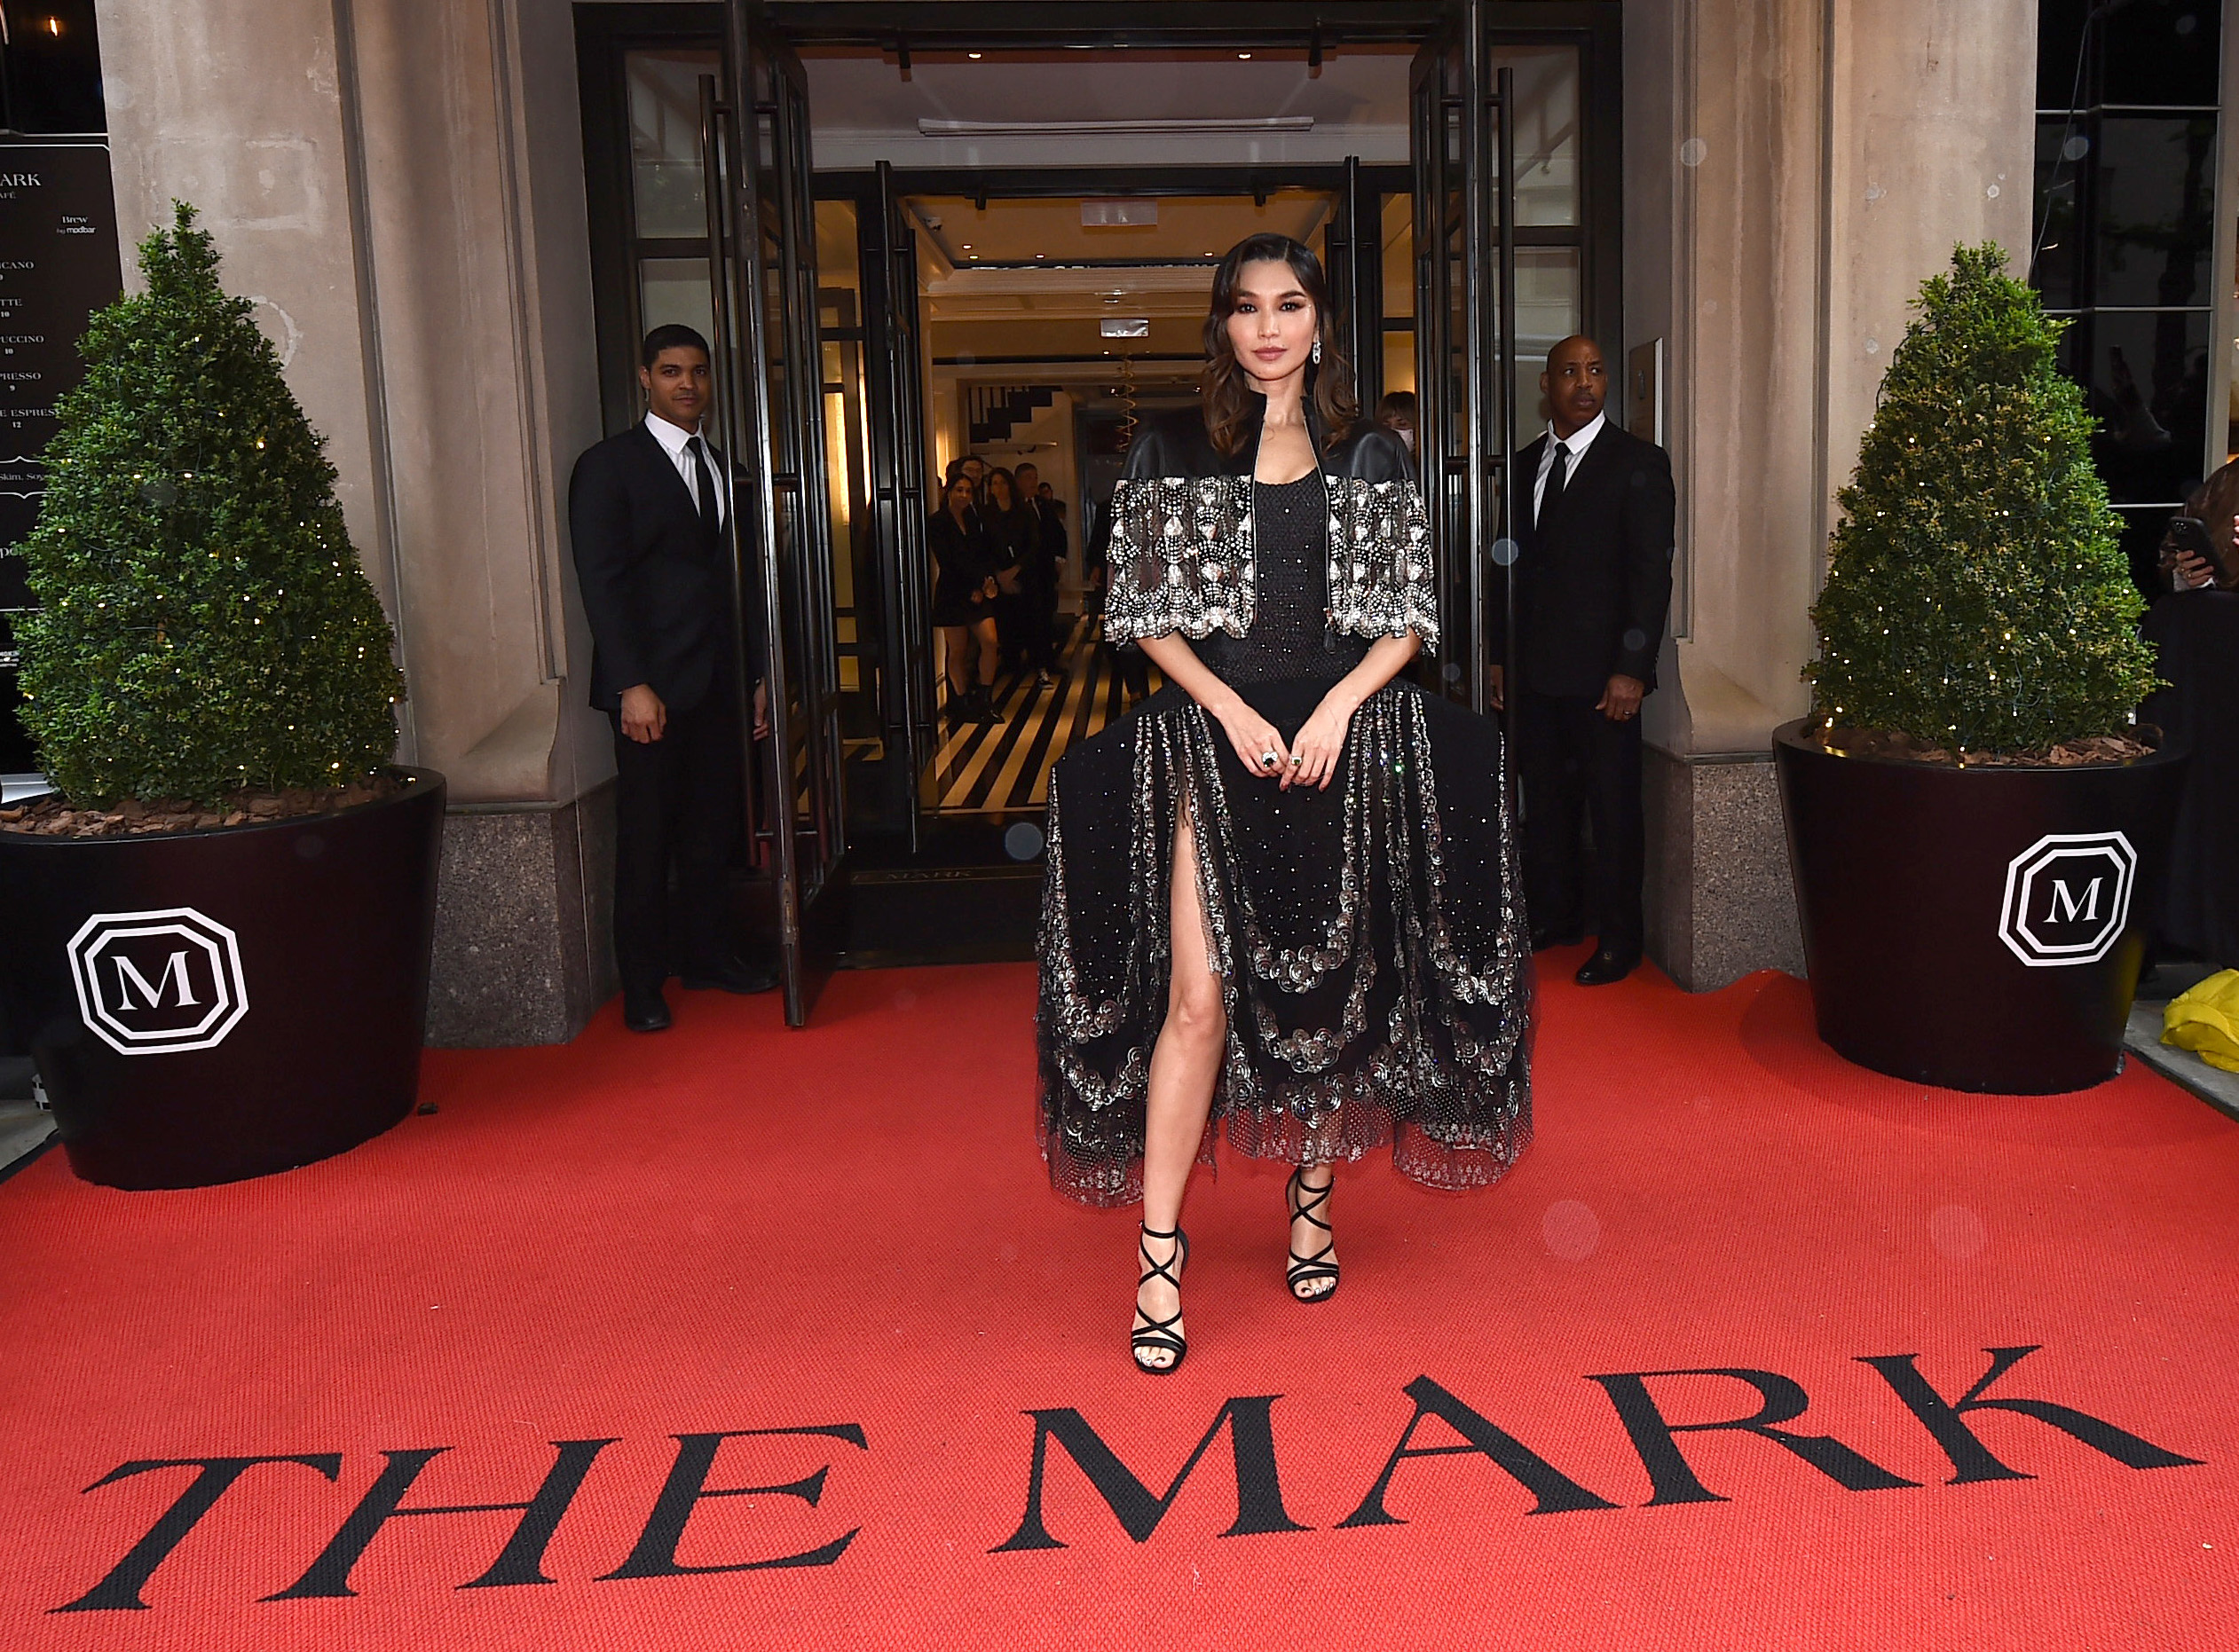 Gemma Chan y un look controvertido
(Photo by Ilya S. Savenok/Getty Images for The Mark)